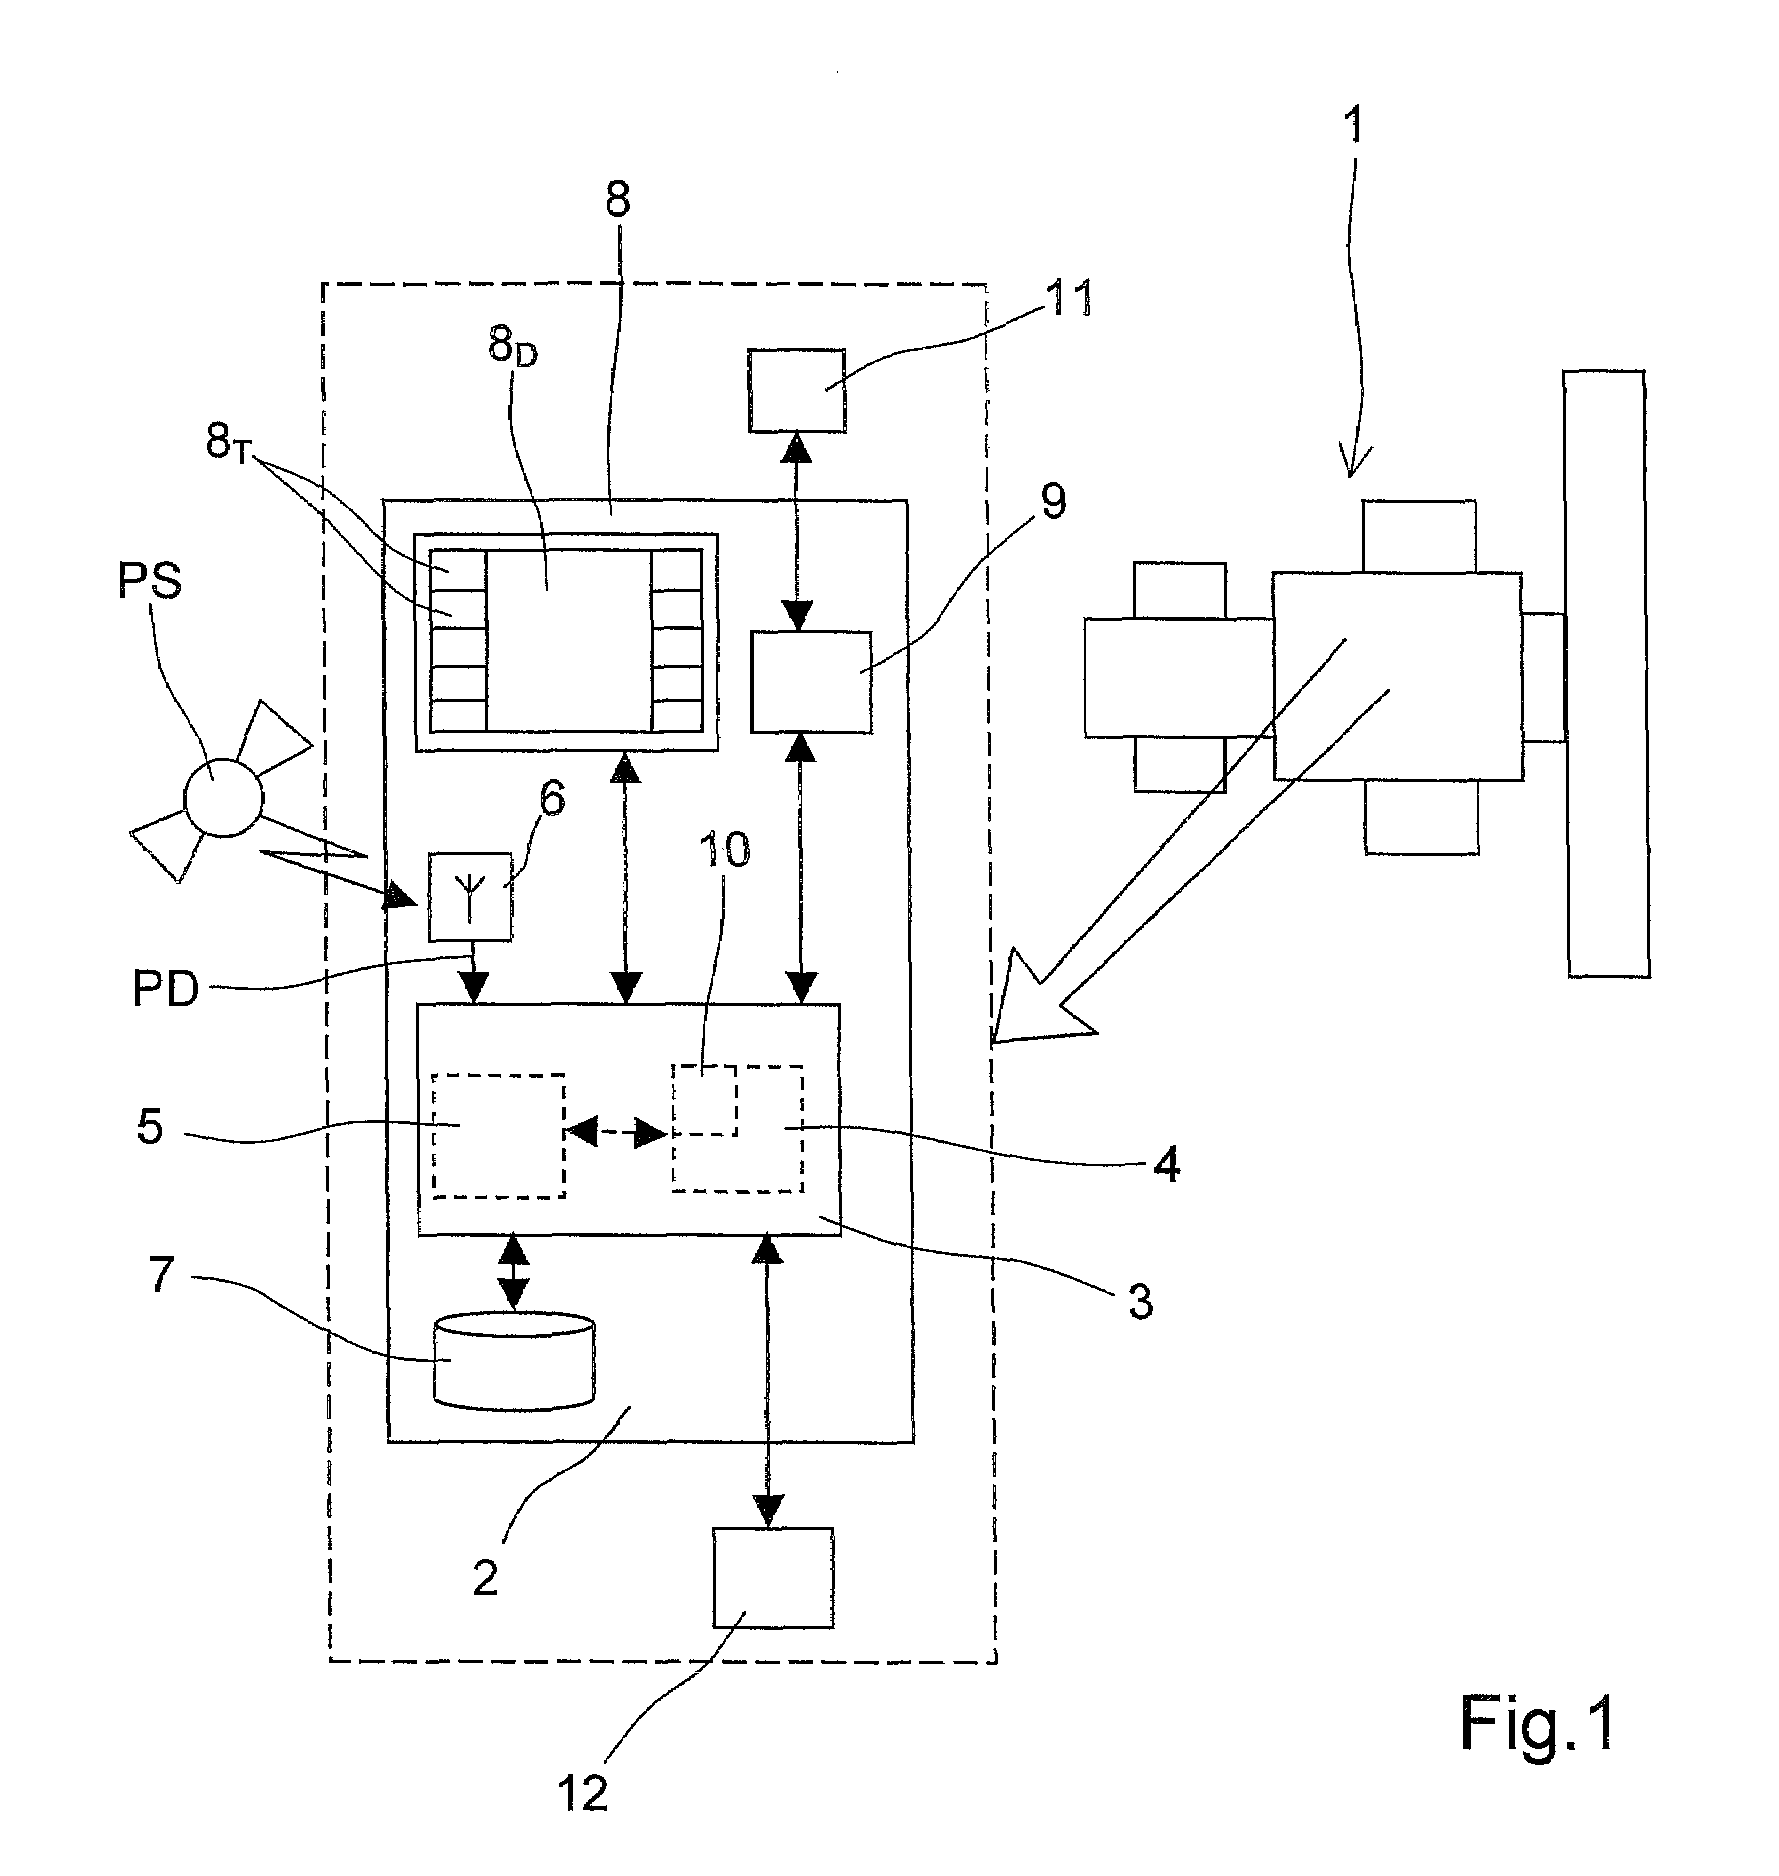 Method for controlling an agricultural machine system